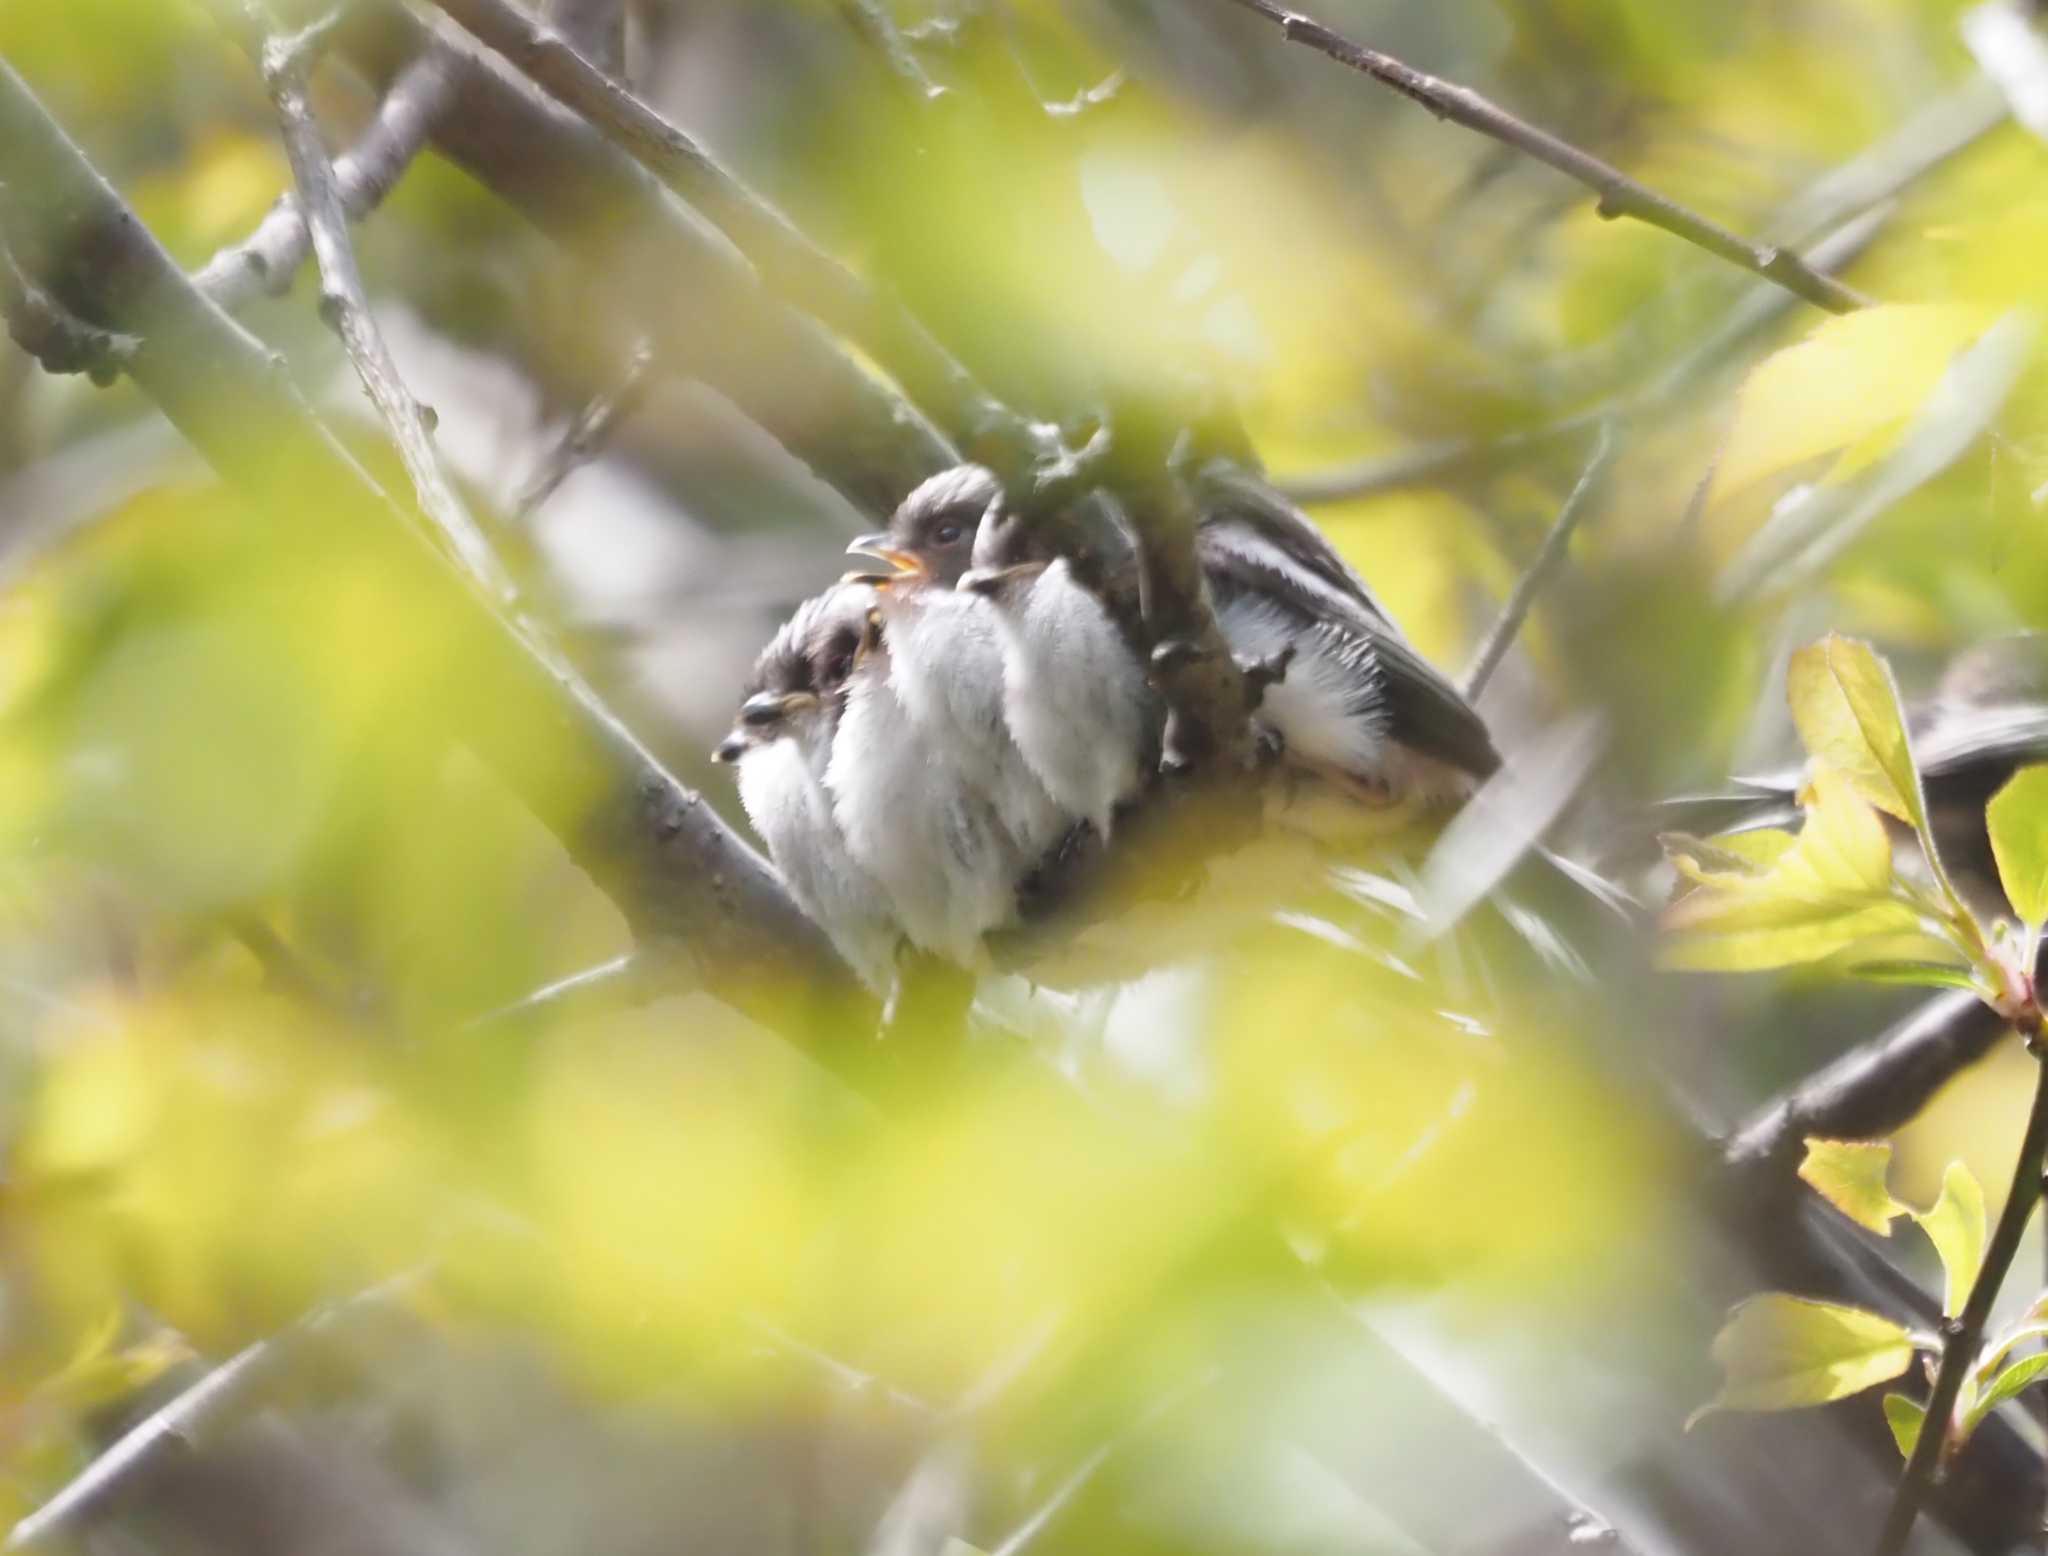 Photo of Long-tailed Tit at 尼崎市農業公園 by マル